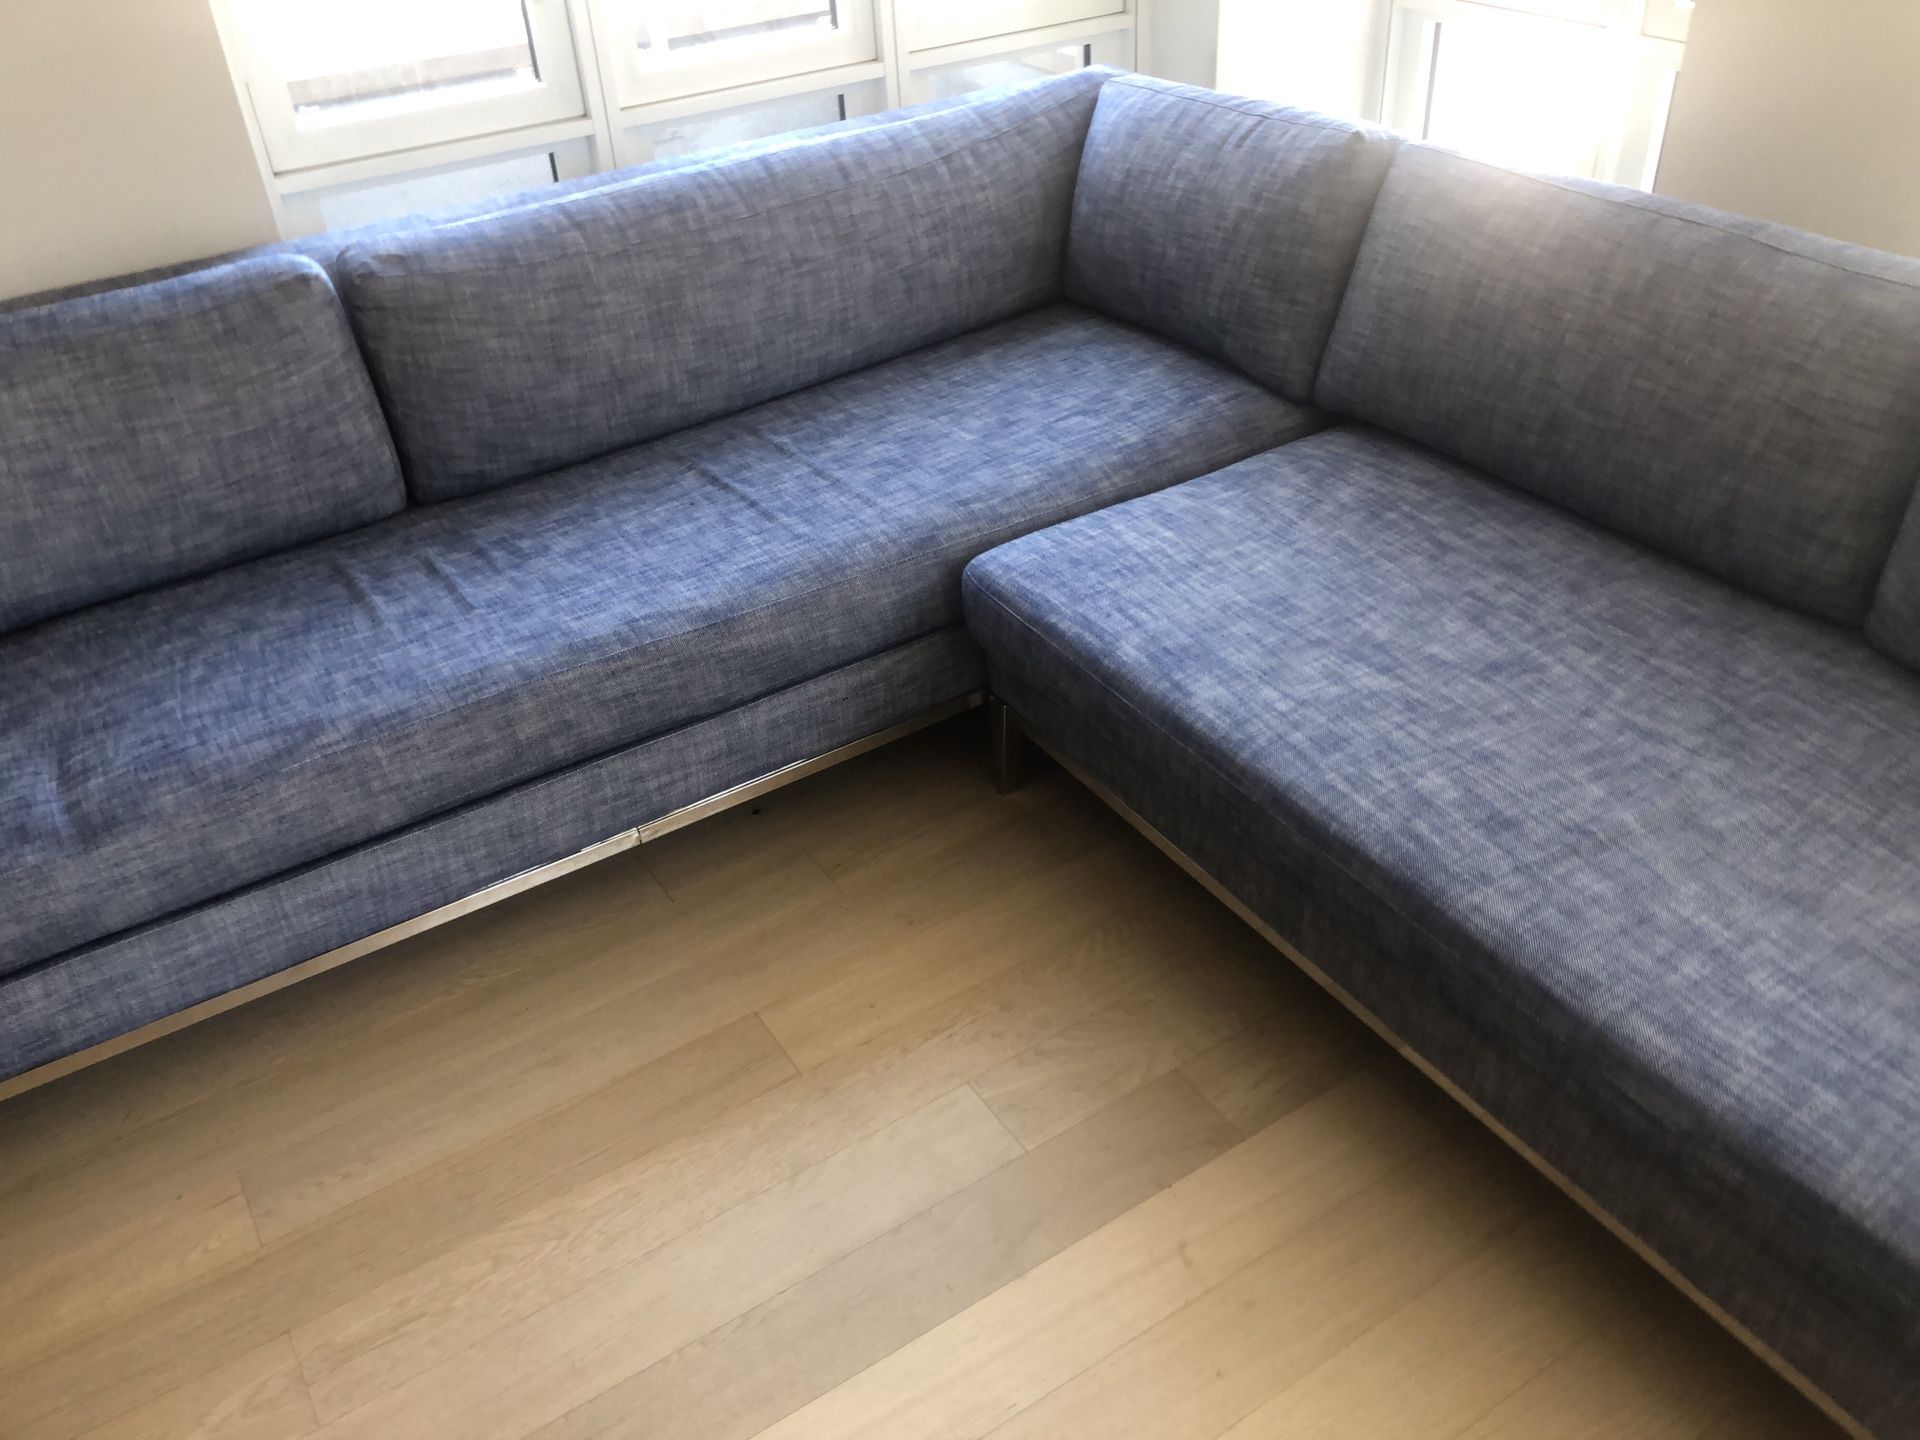 Blue restoration hardware sectional couch